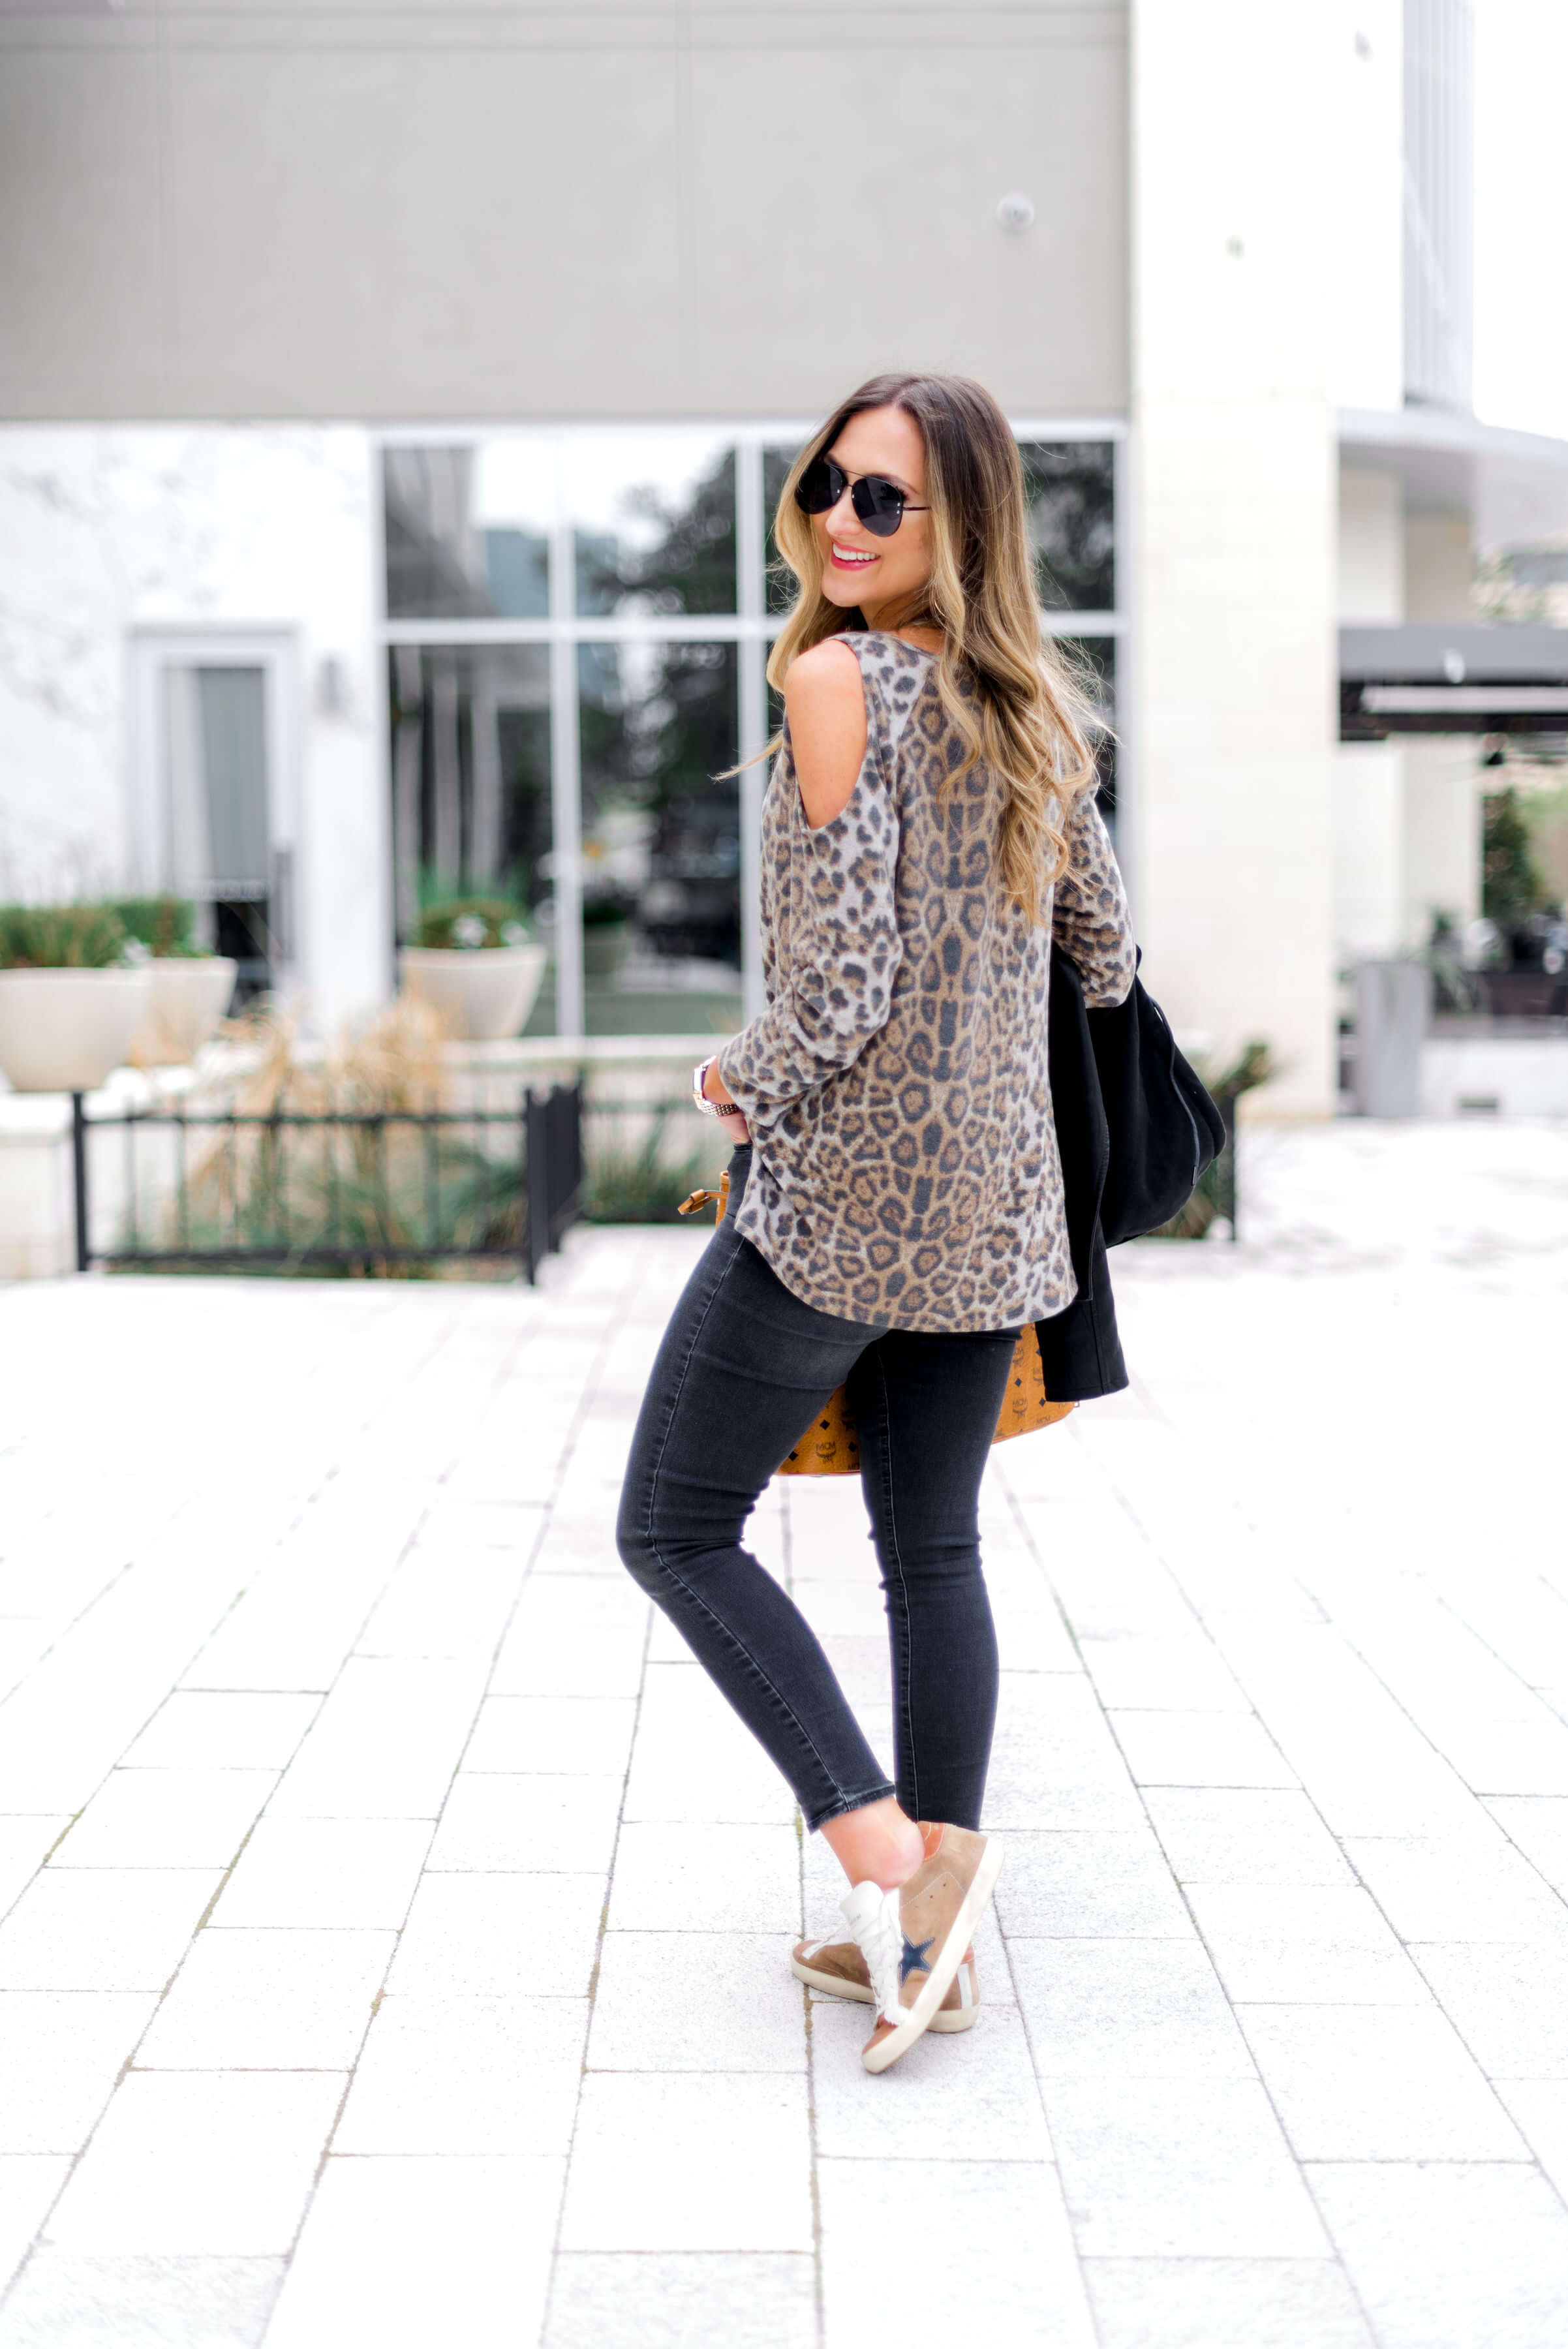 SHOP STYLE YOUR SENSES | LEOPARD TOP WITH BLACK JEANS AND MCM BAG